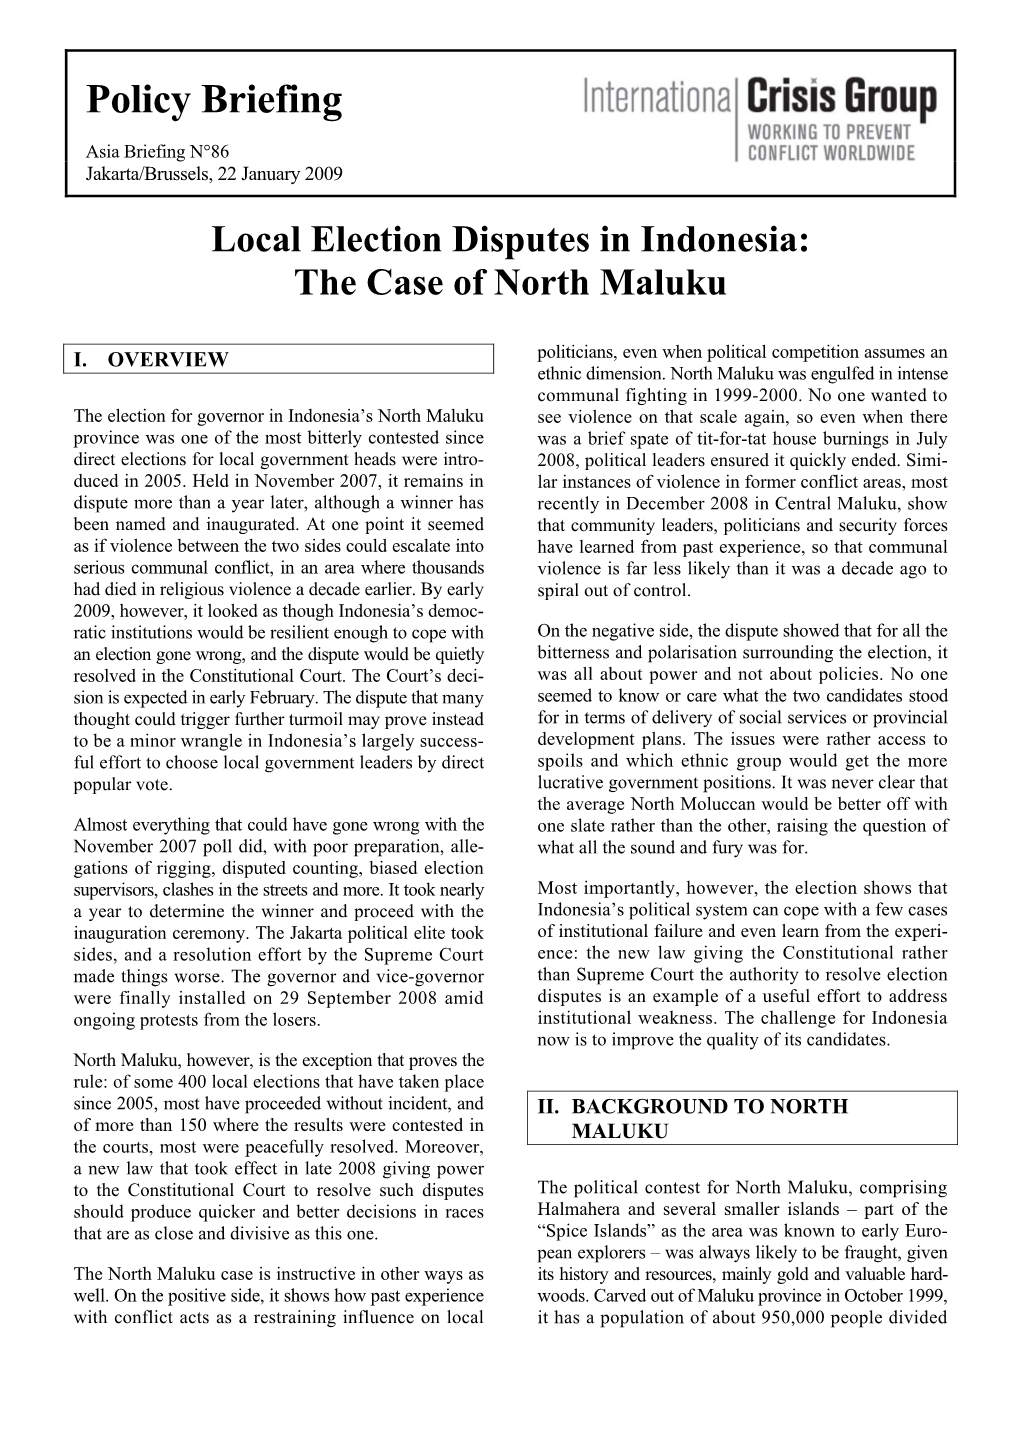 January 2009 Local Election Disputes in Indonesia: the Case of North Maluku